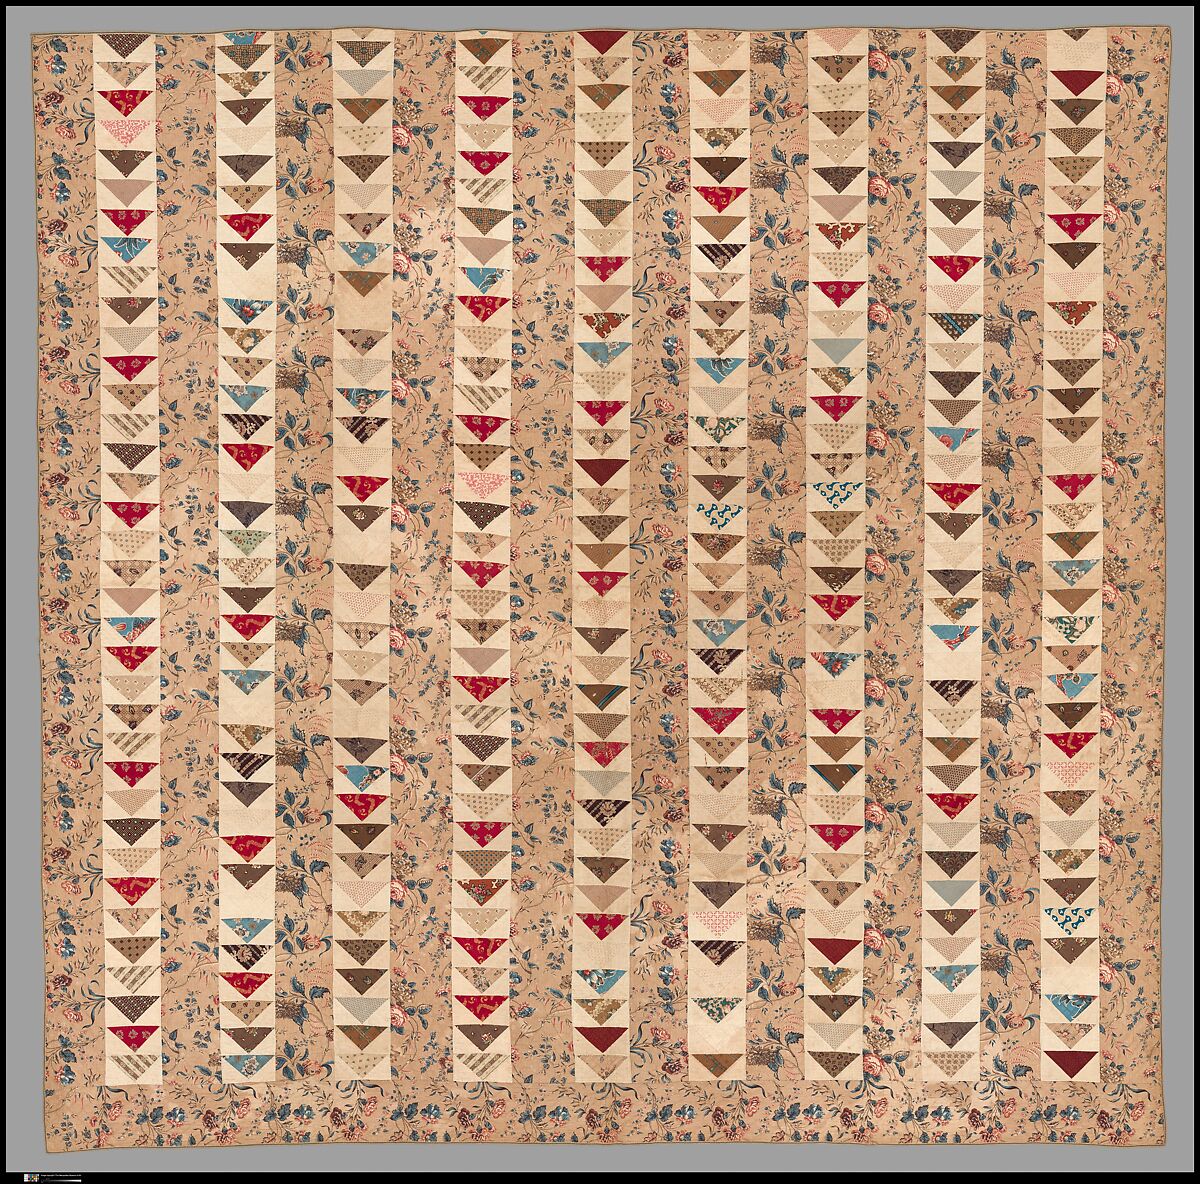 Quilt, Flying Geese pattern, Cotton, American 